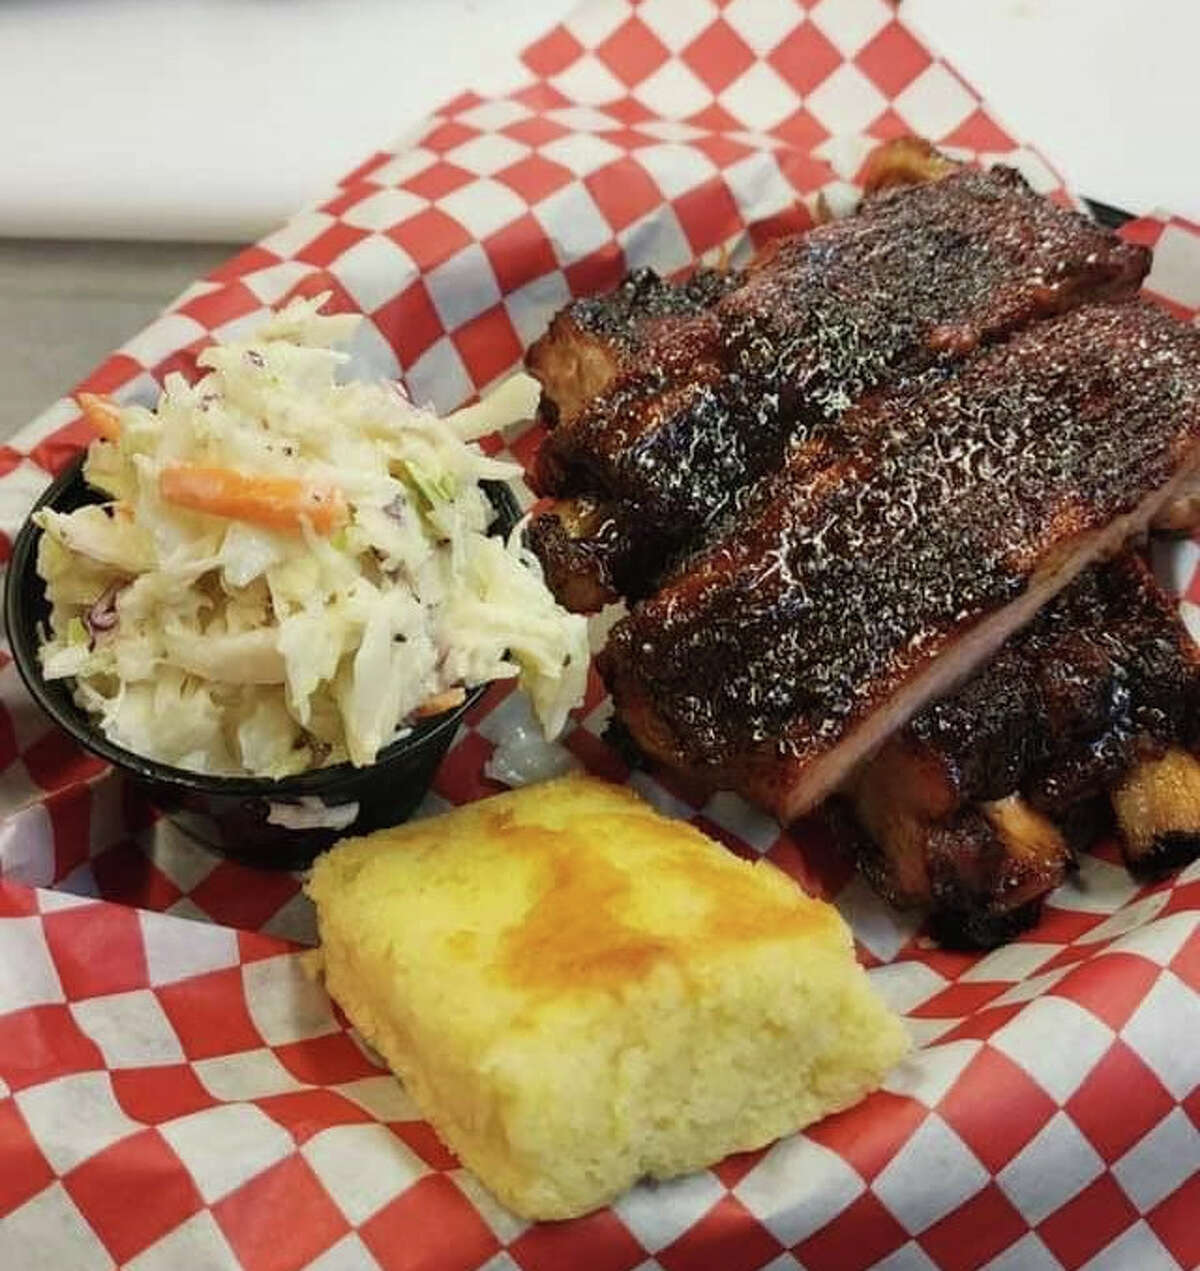 Ribs are among the smoked meats available from Miller's Backyard BBQ, formerly a Washington County-based food truck that has taken over the former Pig Pit BBQ building at  1 Niver St. in Cohoes, alongside Route 787.